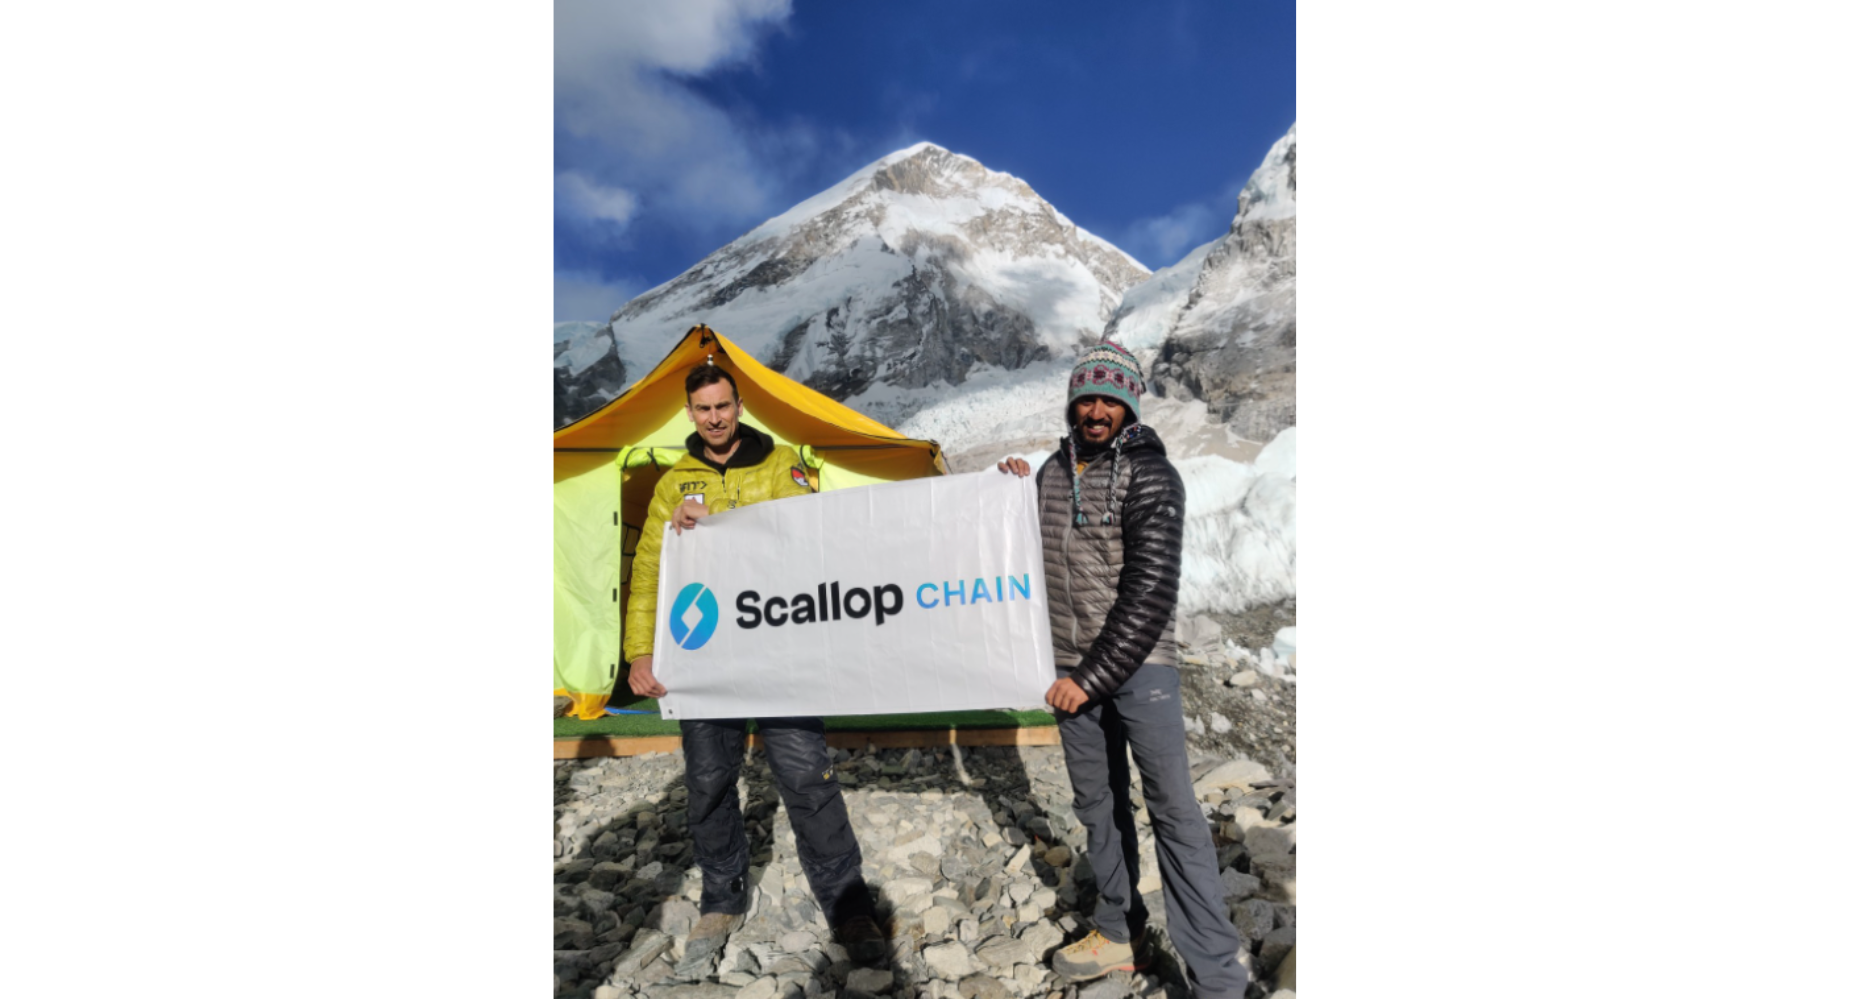 Digital FinTech Company Scallop Becomes One Of Few Crypto Brands To Reach Mount Everest